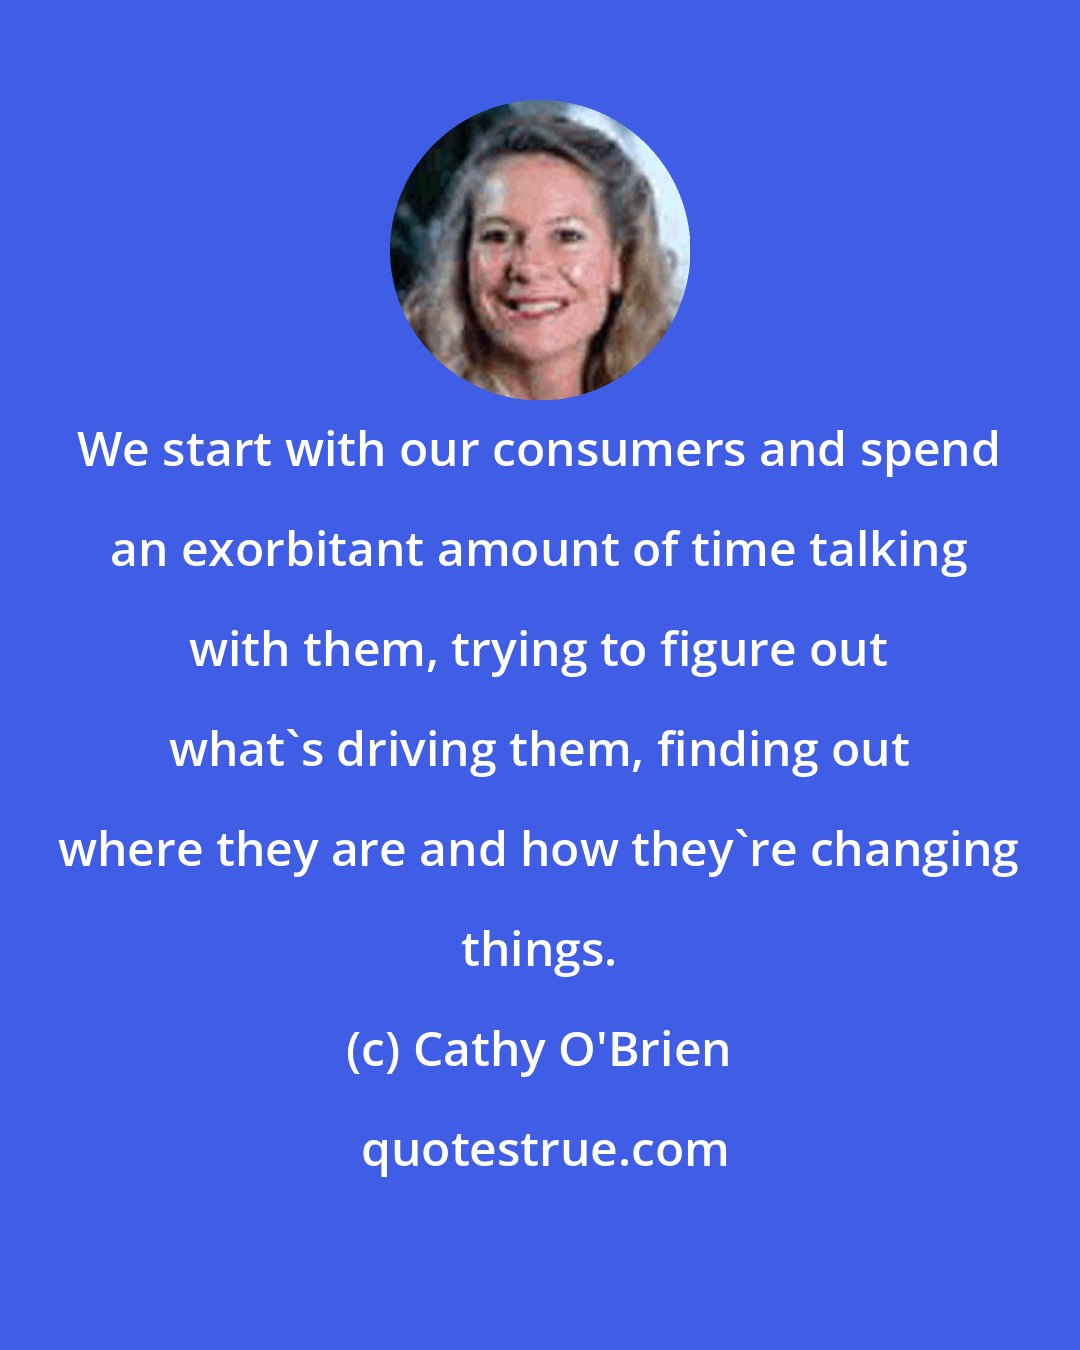 Cathy O'Brien: We start with our consumers and spend an exorbitant amount of time talking with them, trying to figure out what's driving them, finding out where they are and how they're changing things.